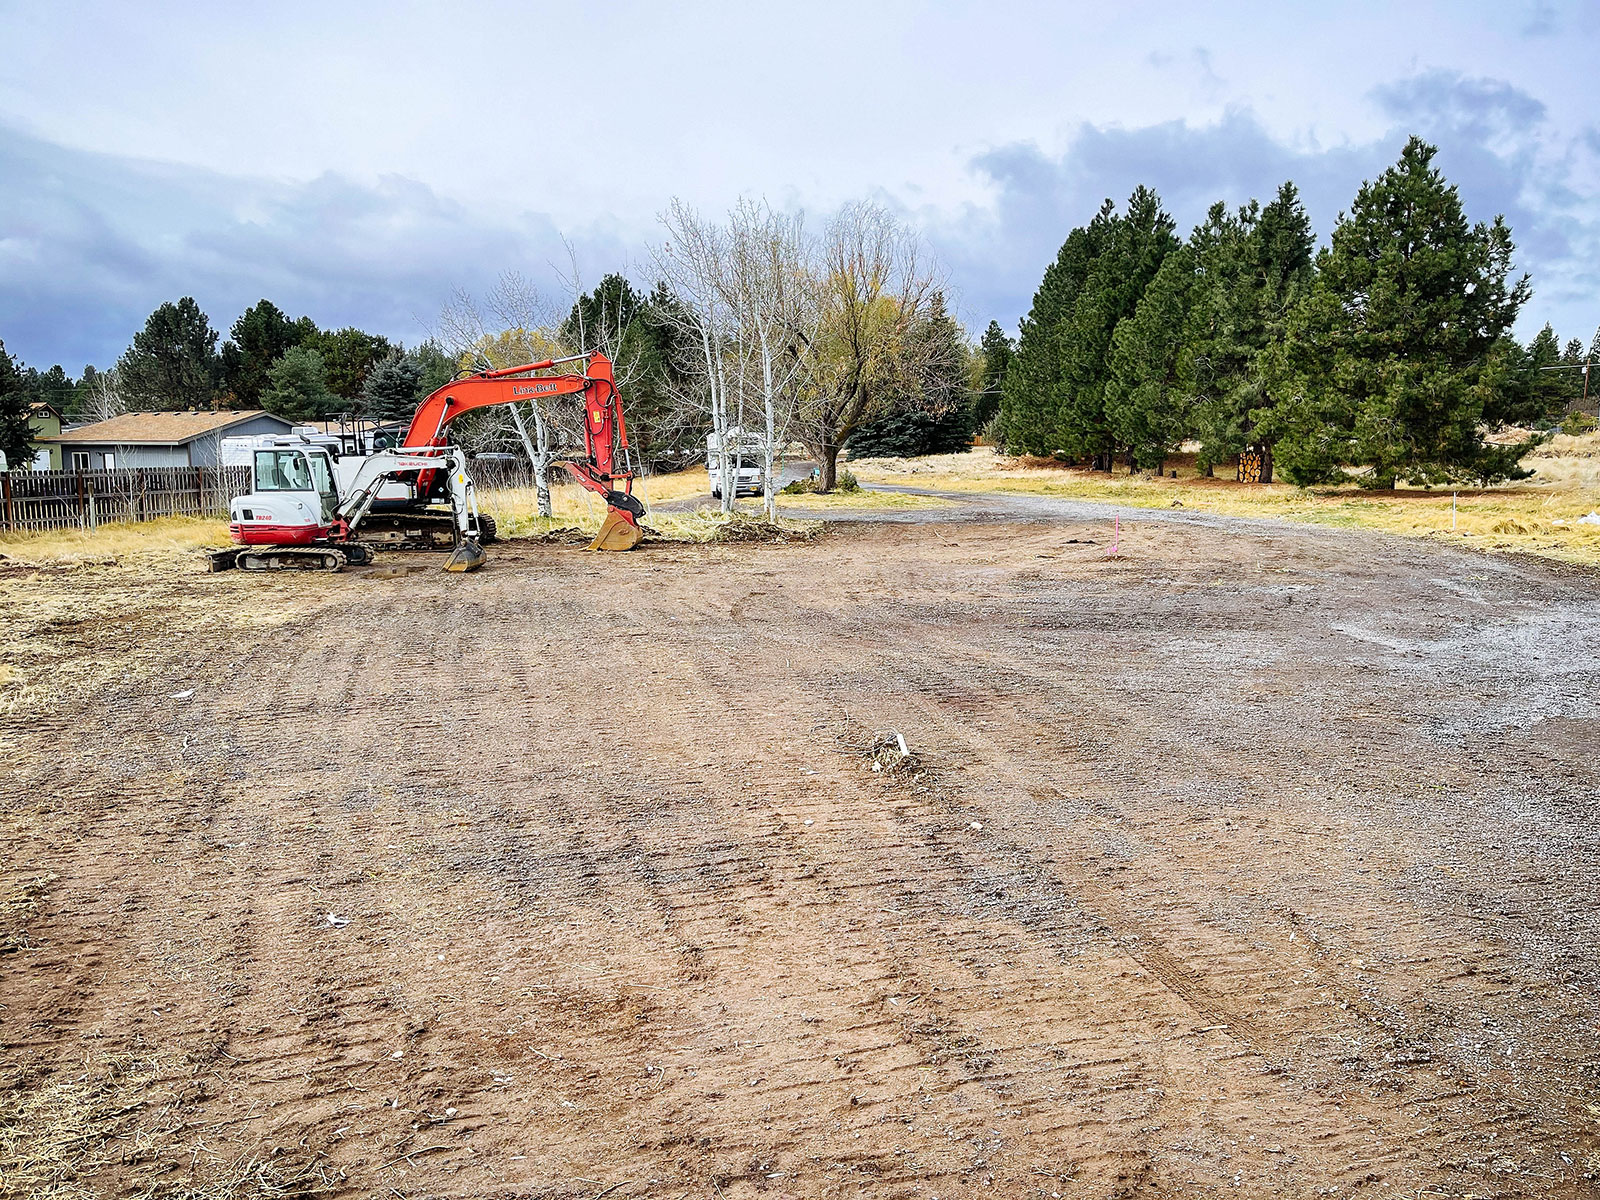 Smooth and graded land after demolition, with excavators parked in the background